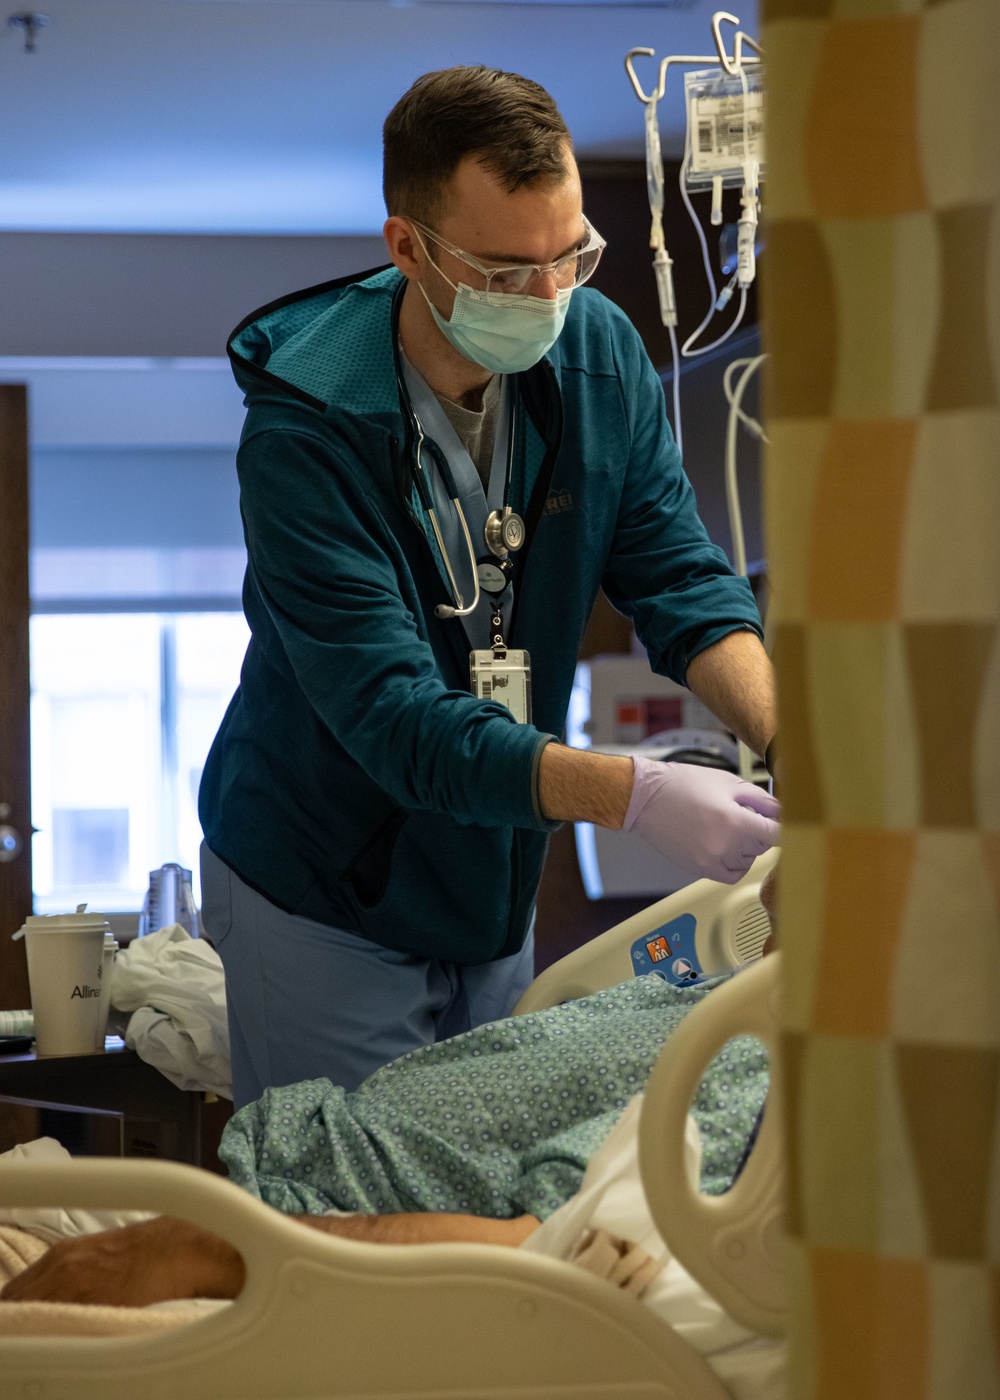 U.S. Army Medical Team Conducts Final Day of Clinical Operations at Minneapolis Hospital